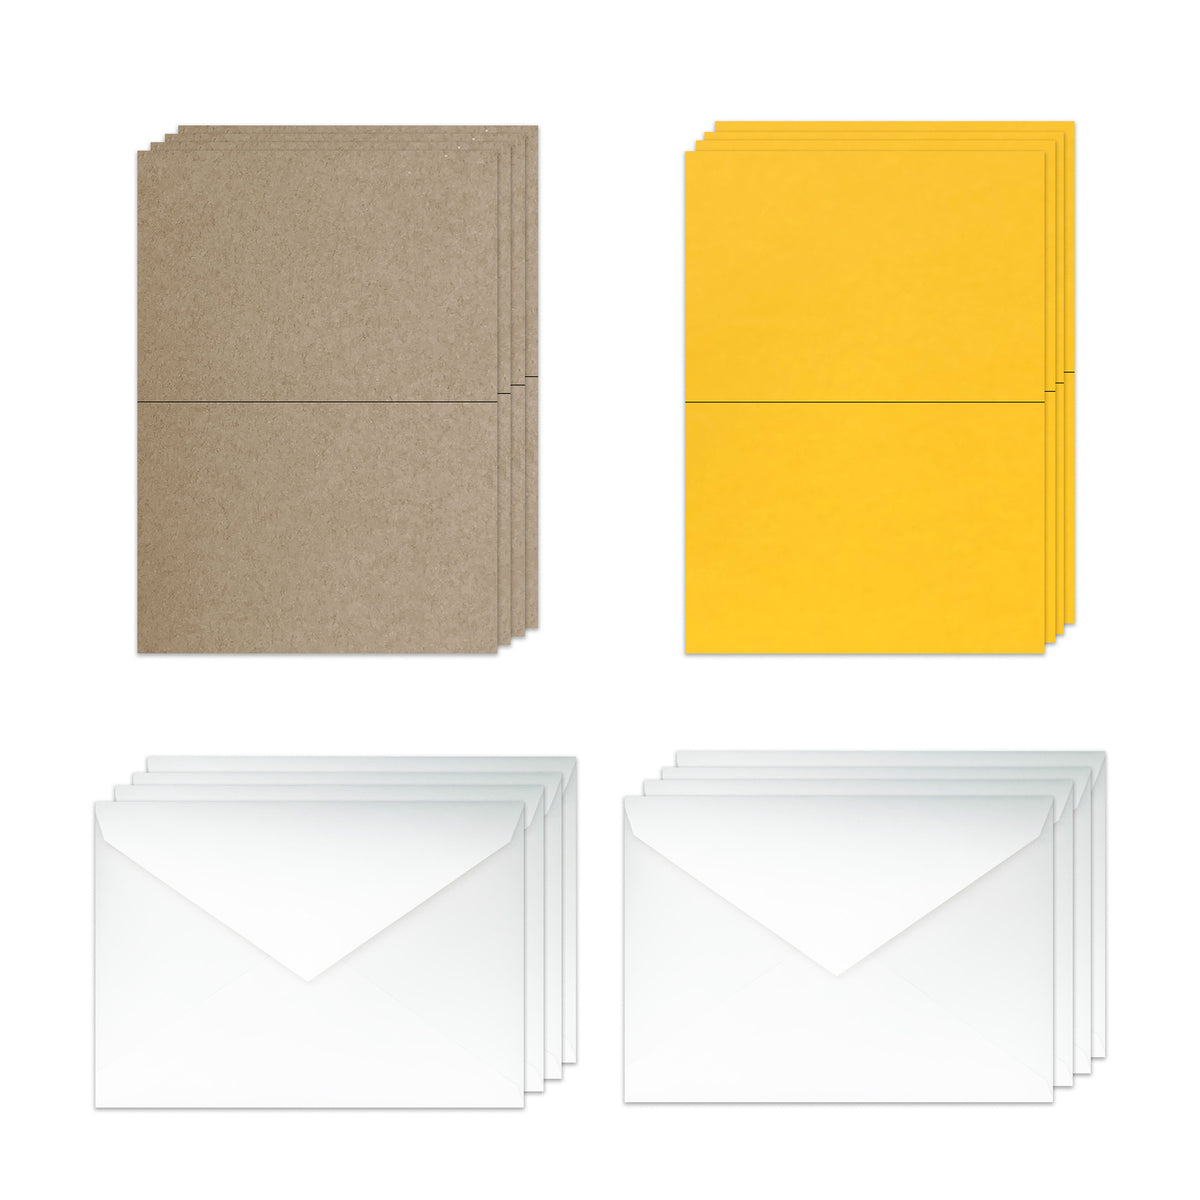 A2 Folded Discount Card Stock and Envelopes - Yellow and Twine